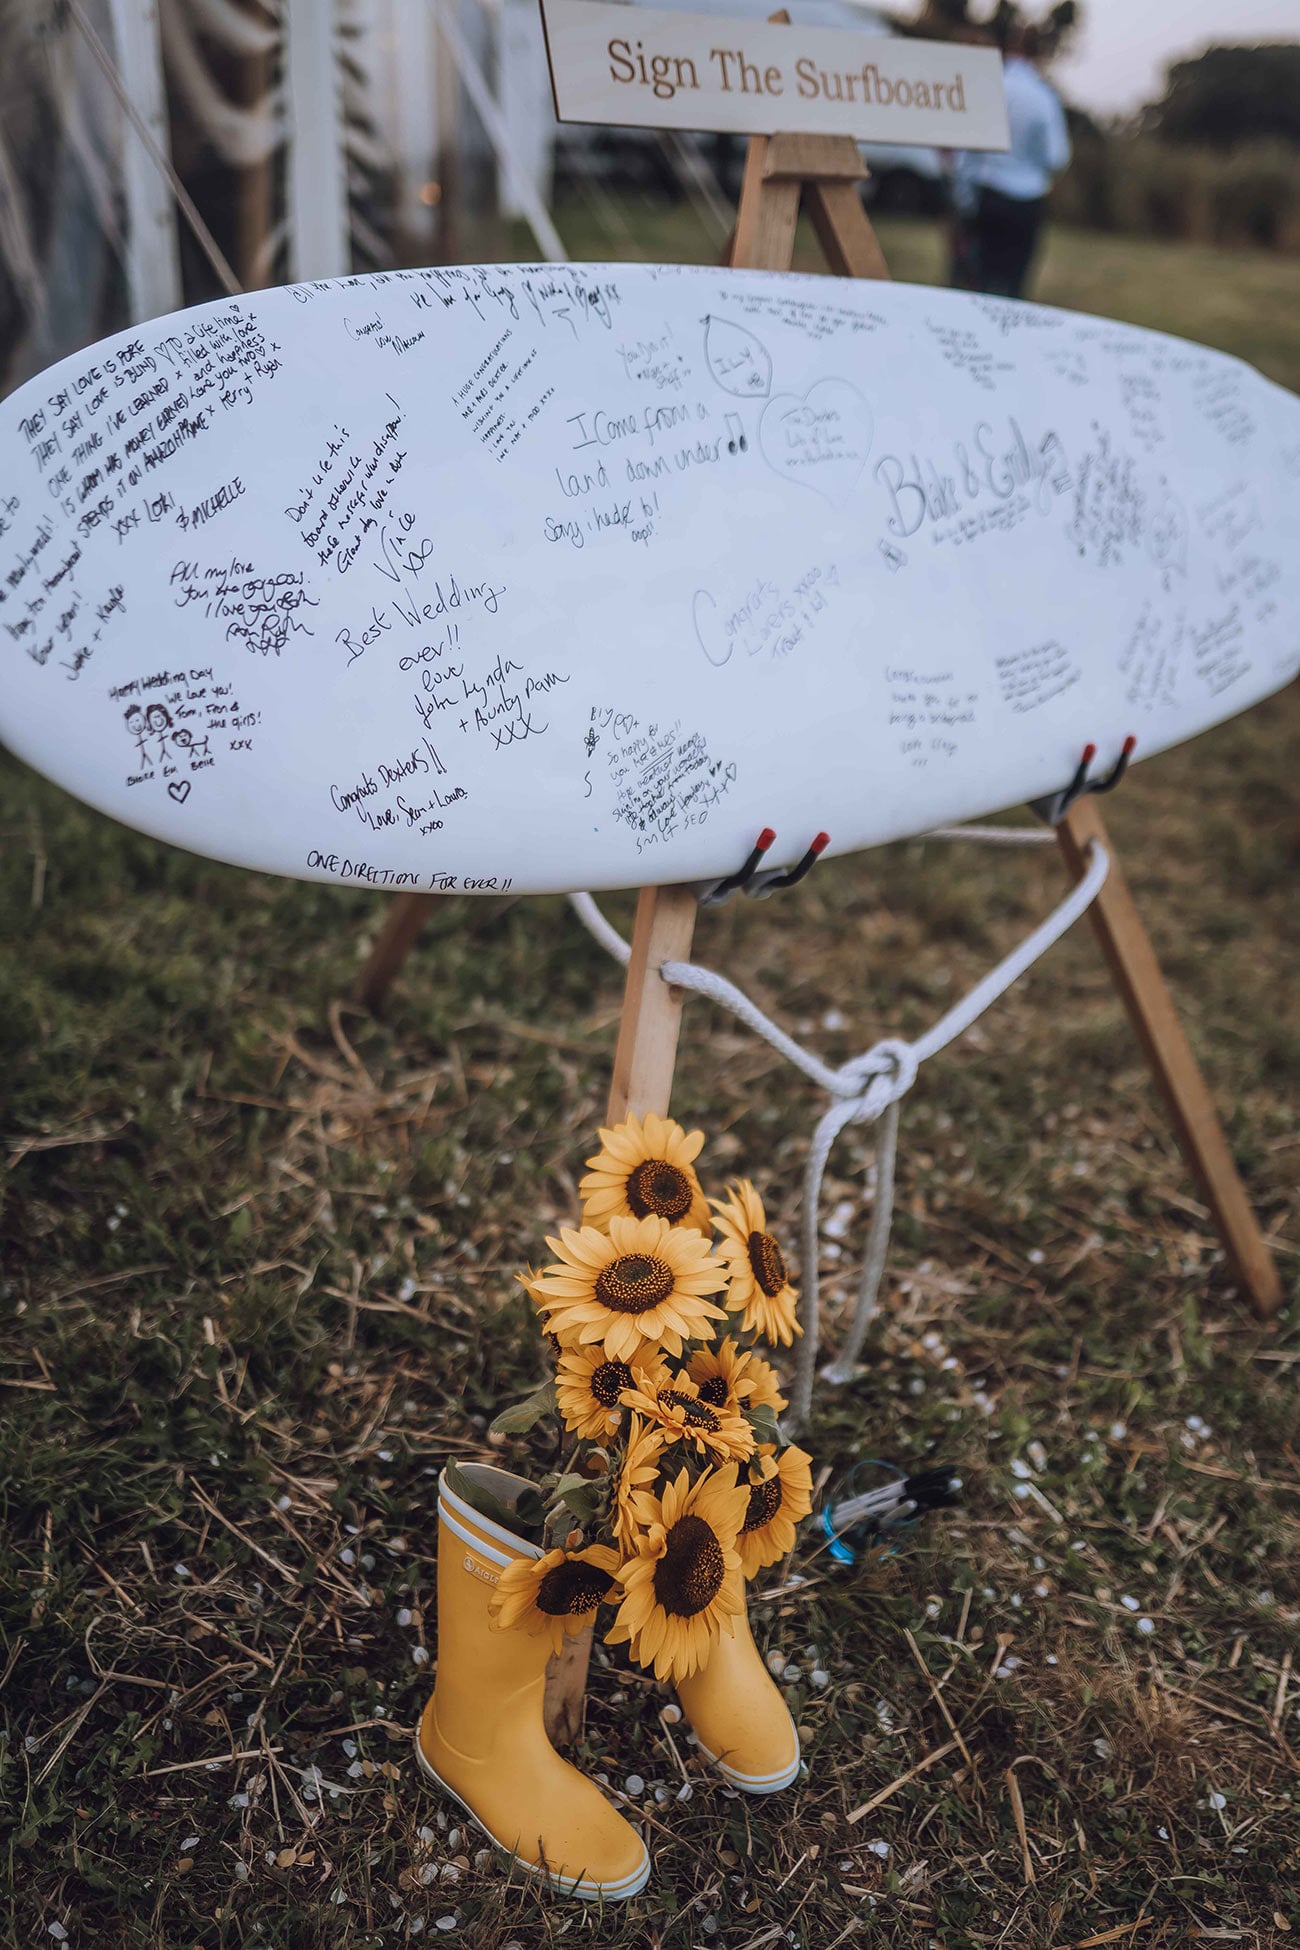 A surf board is used the guest book